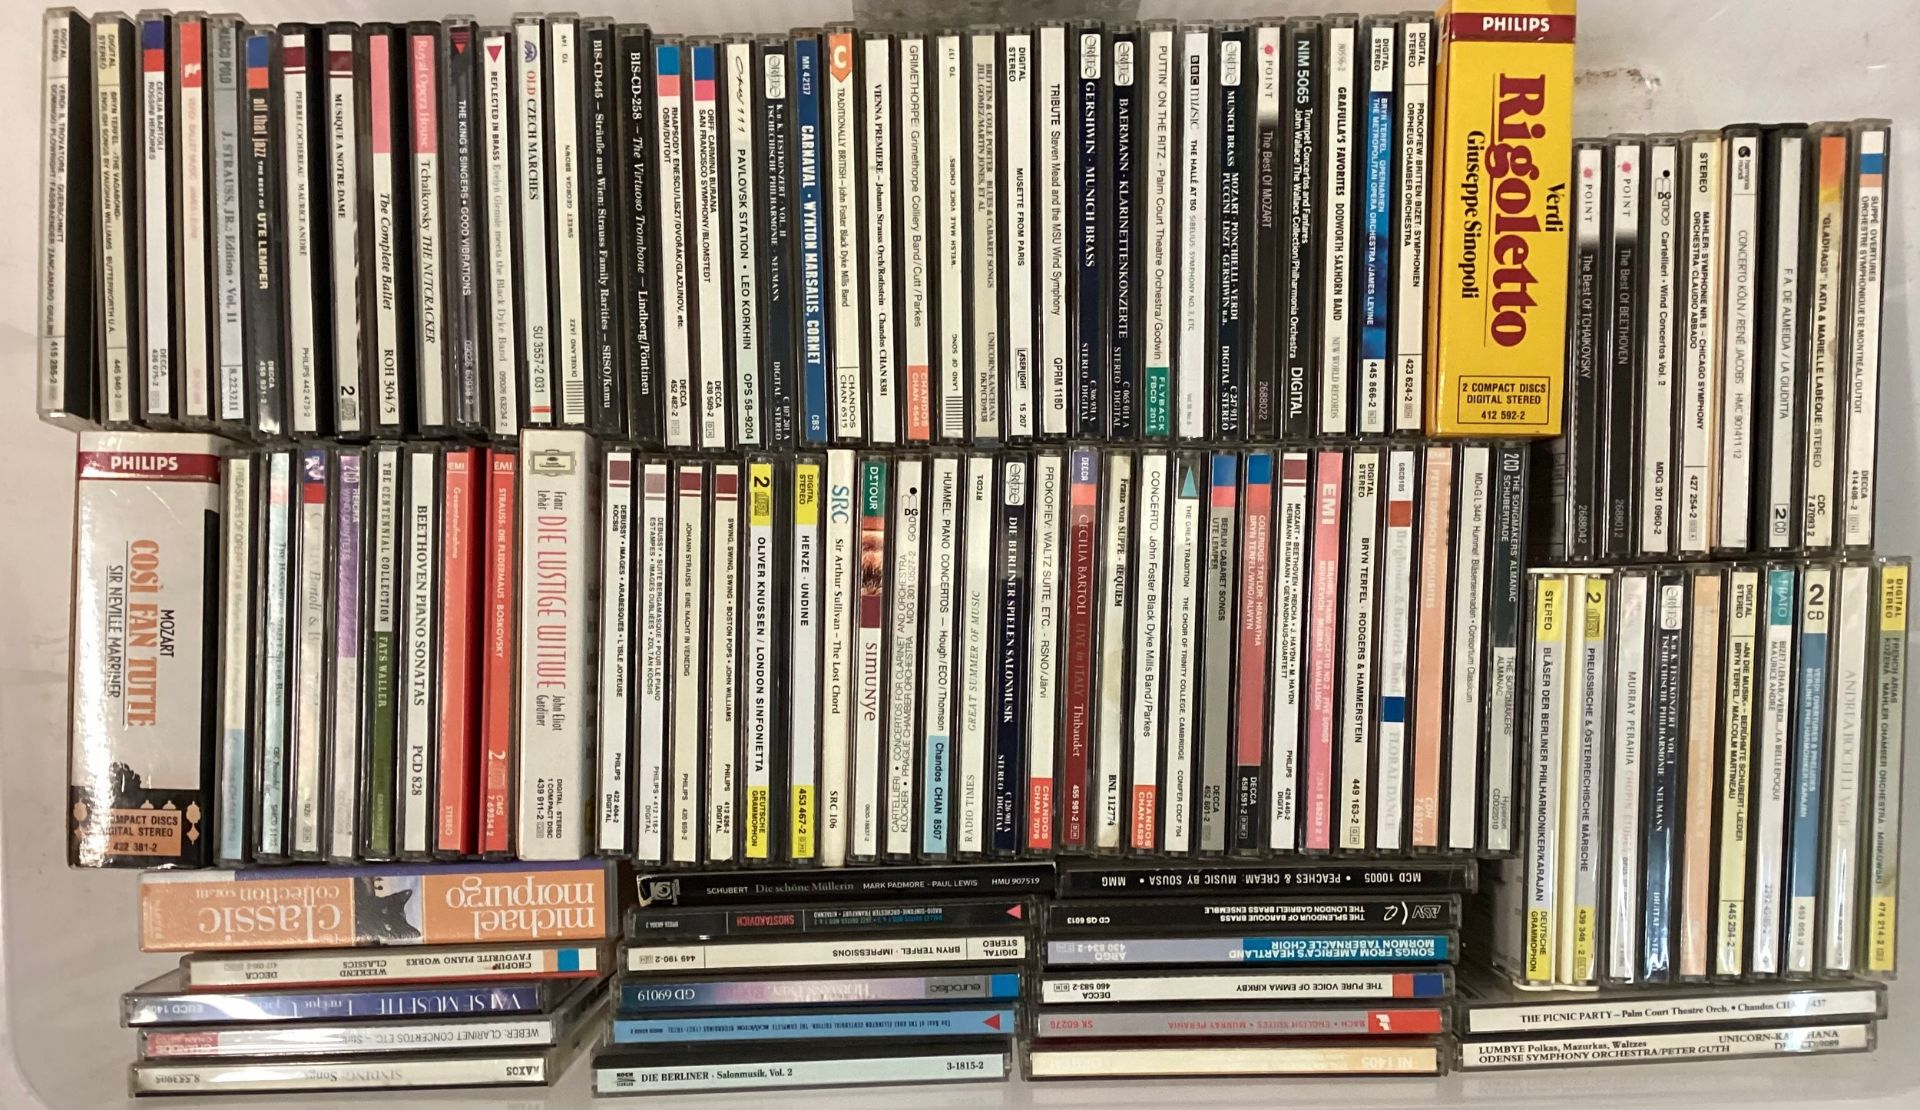 TRAY OF VARIOUS CLASSICAL AND BIG BAND RELATED COMPACT DISCS. To include - Beethoven - Hummel -